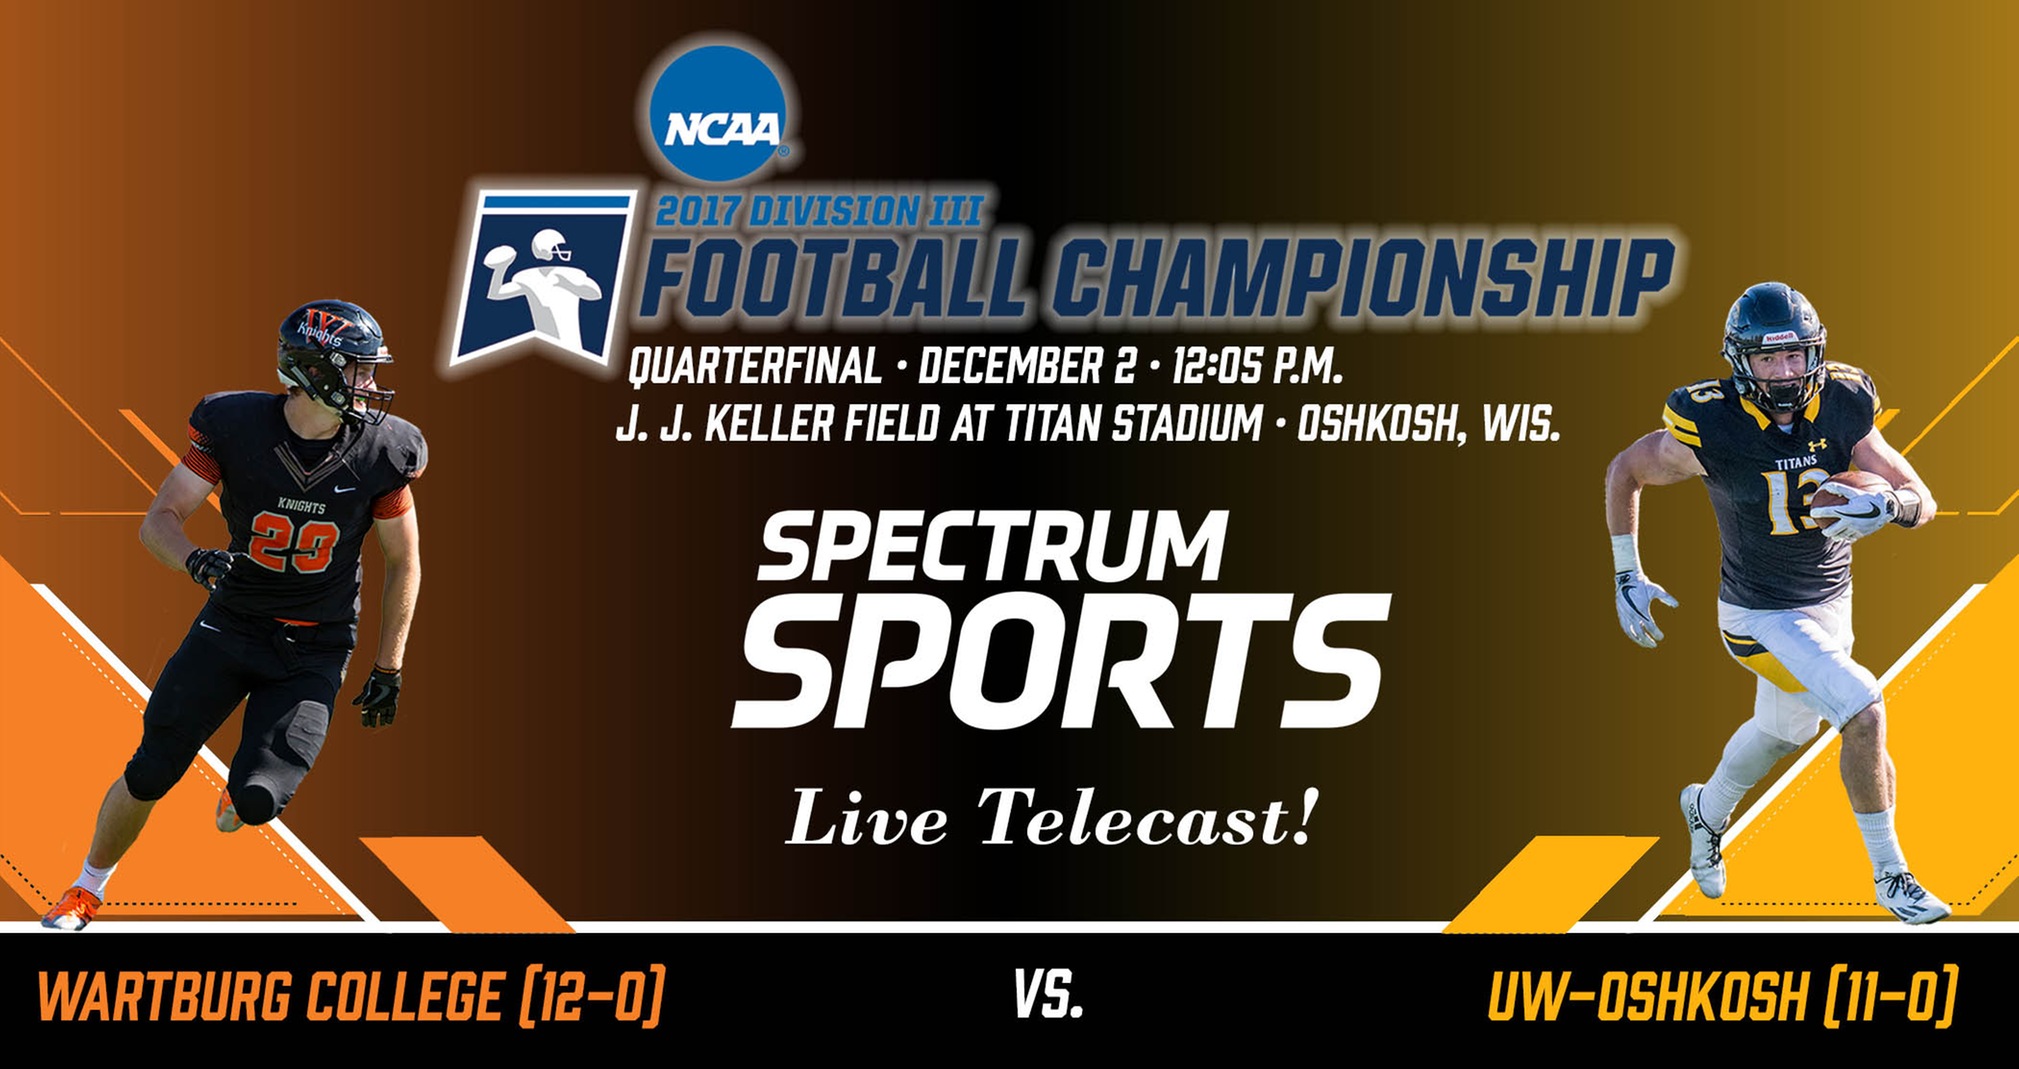 Spectrum Sports To Televise Titans' Football Playoff Game